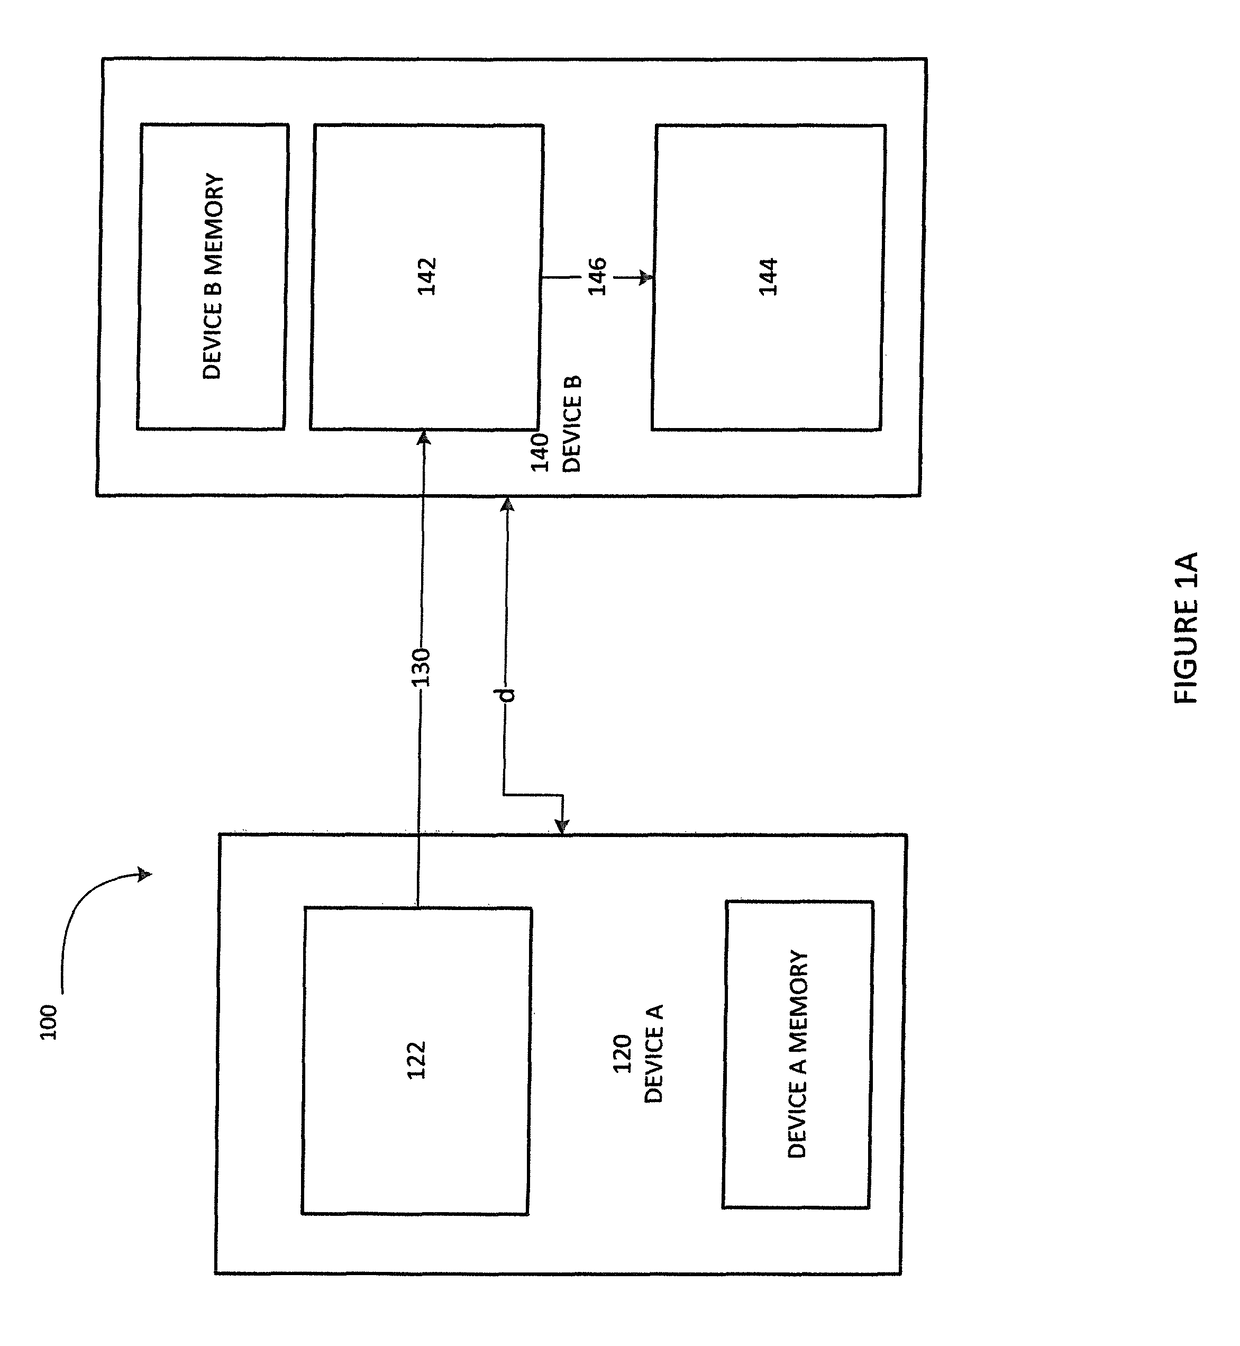 Methods for authenticating device-to-device communication